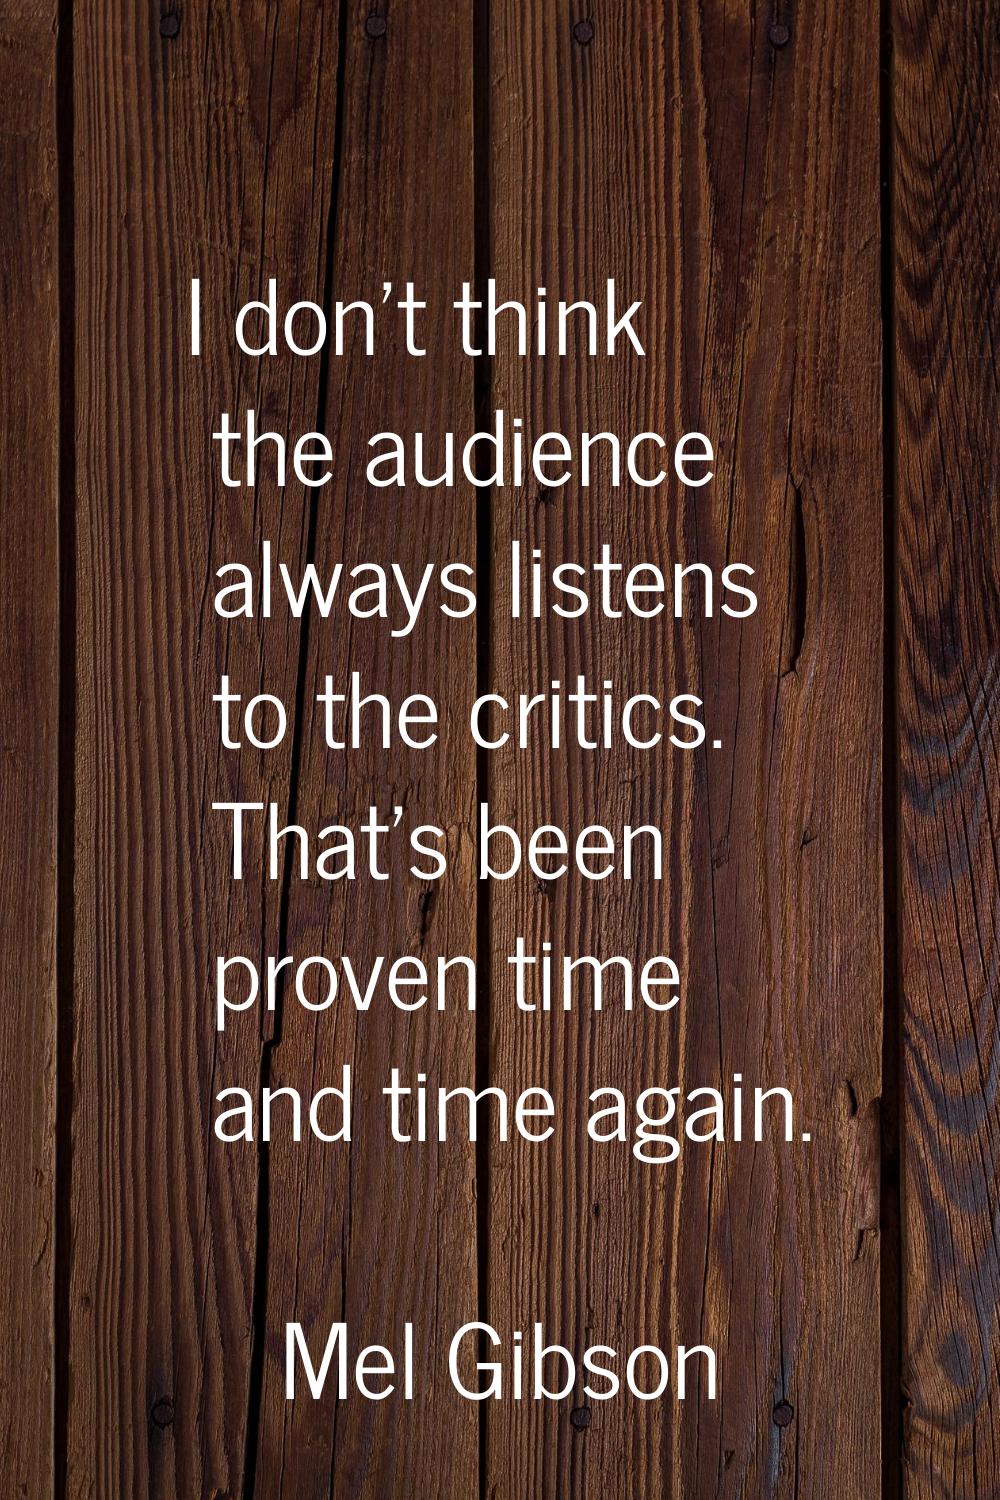 I don't think the audience always listens to the critics. That's been proven time and time again.